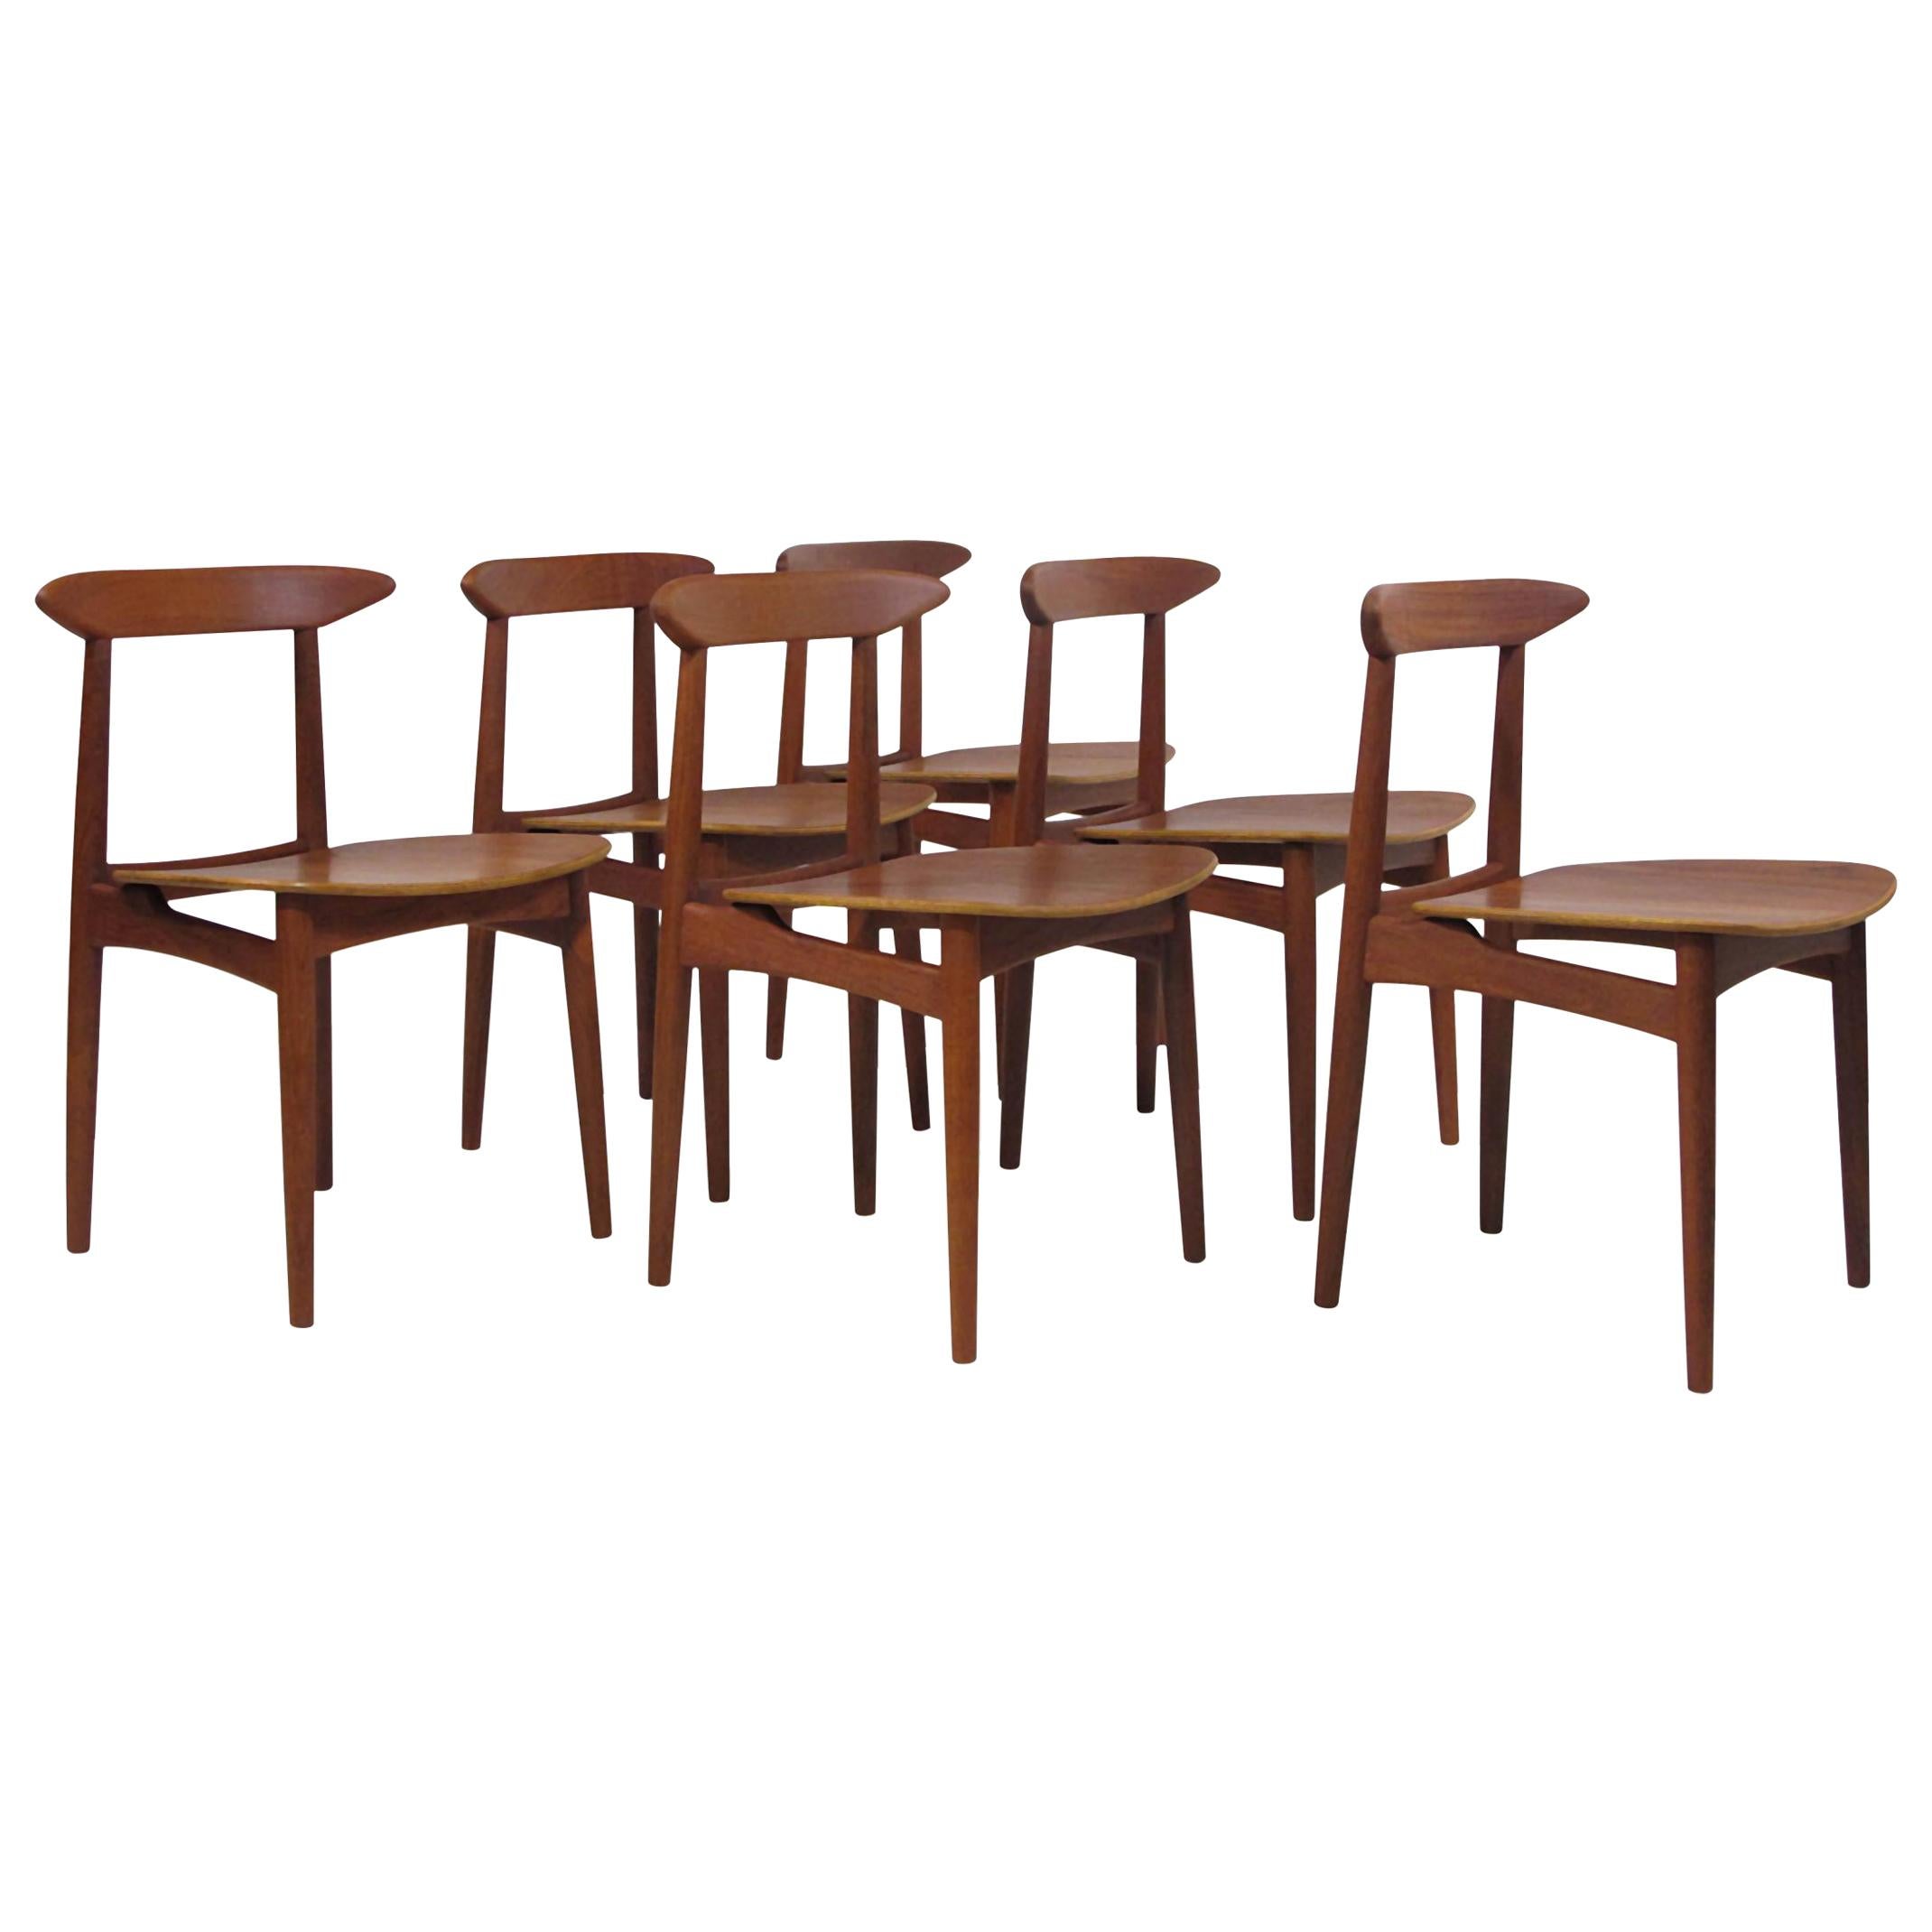 Danish Teak Dining Chairs with Wooden Seats